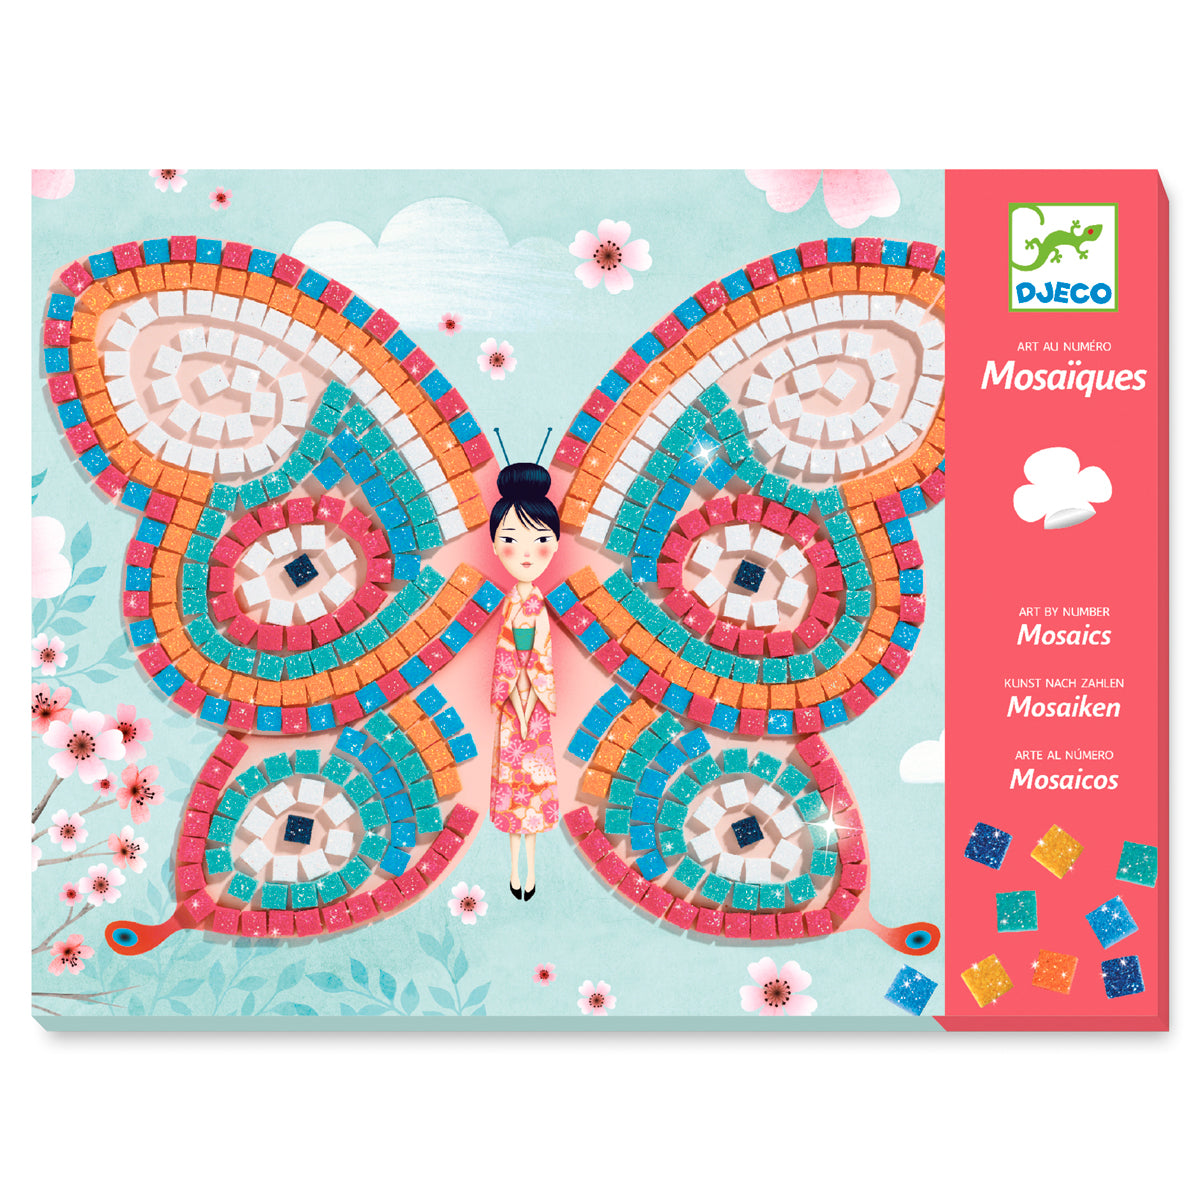 Mosaics Butterfly 4 - 8 years Djeco